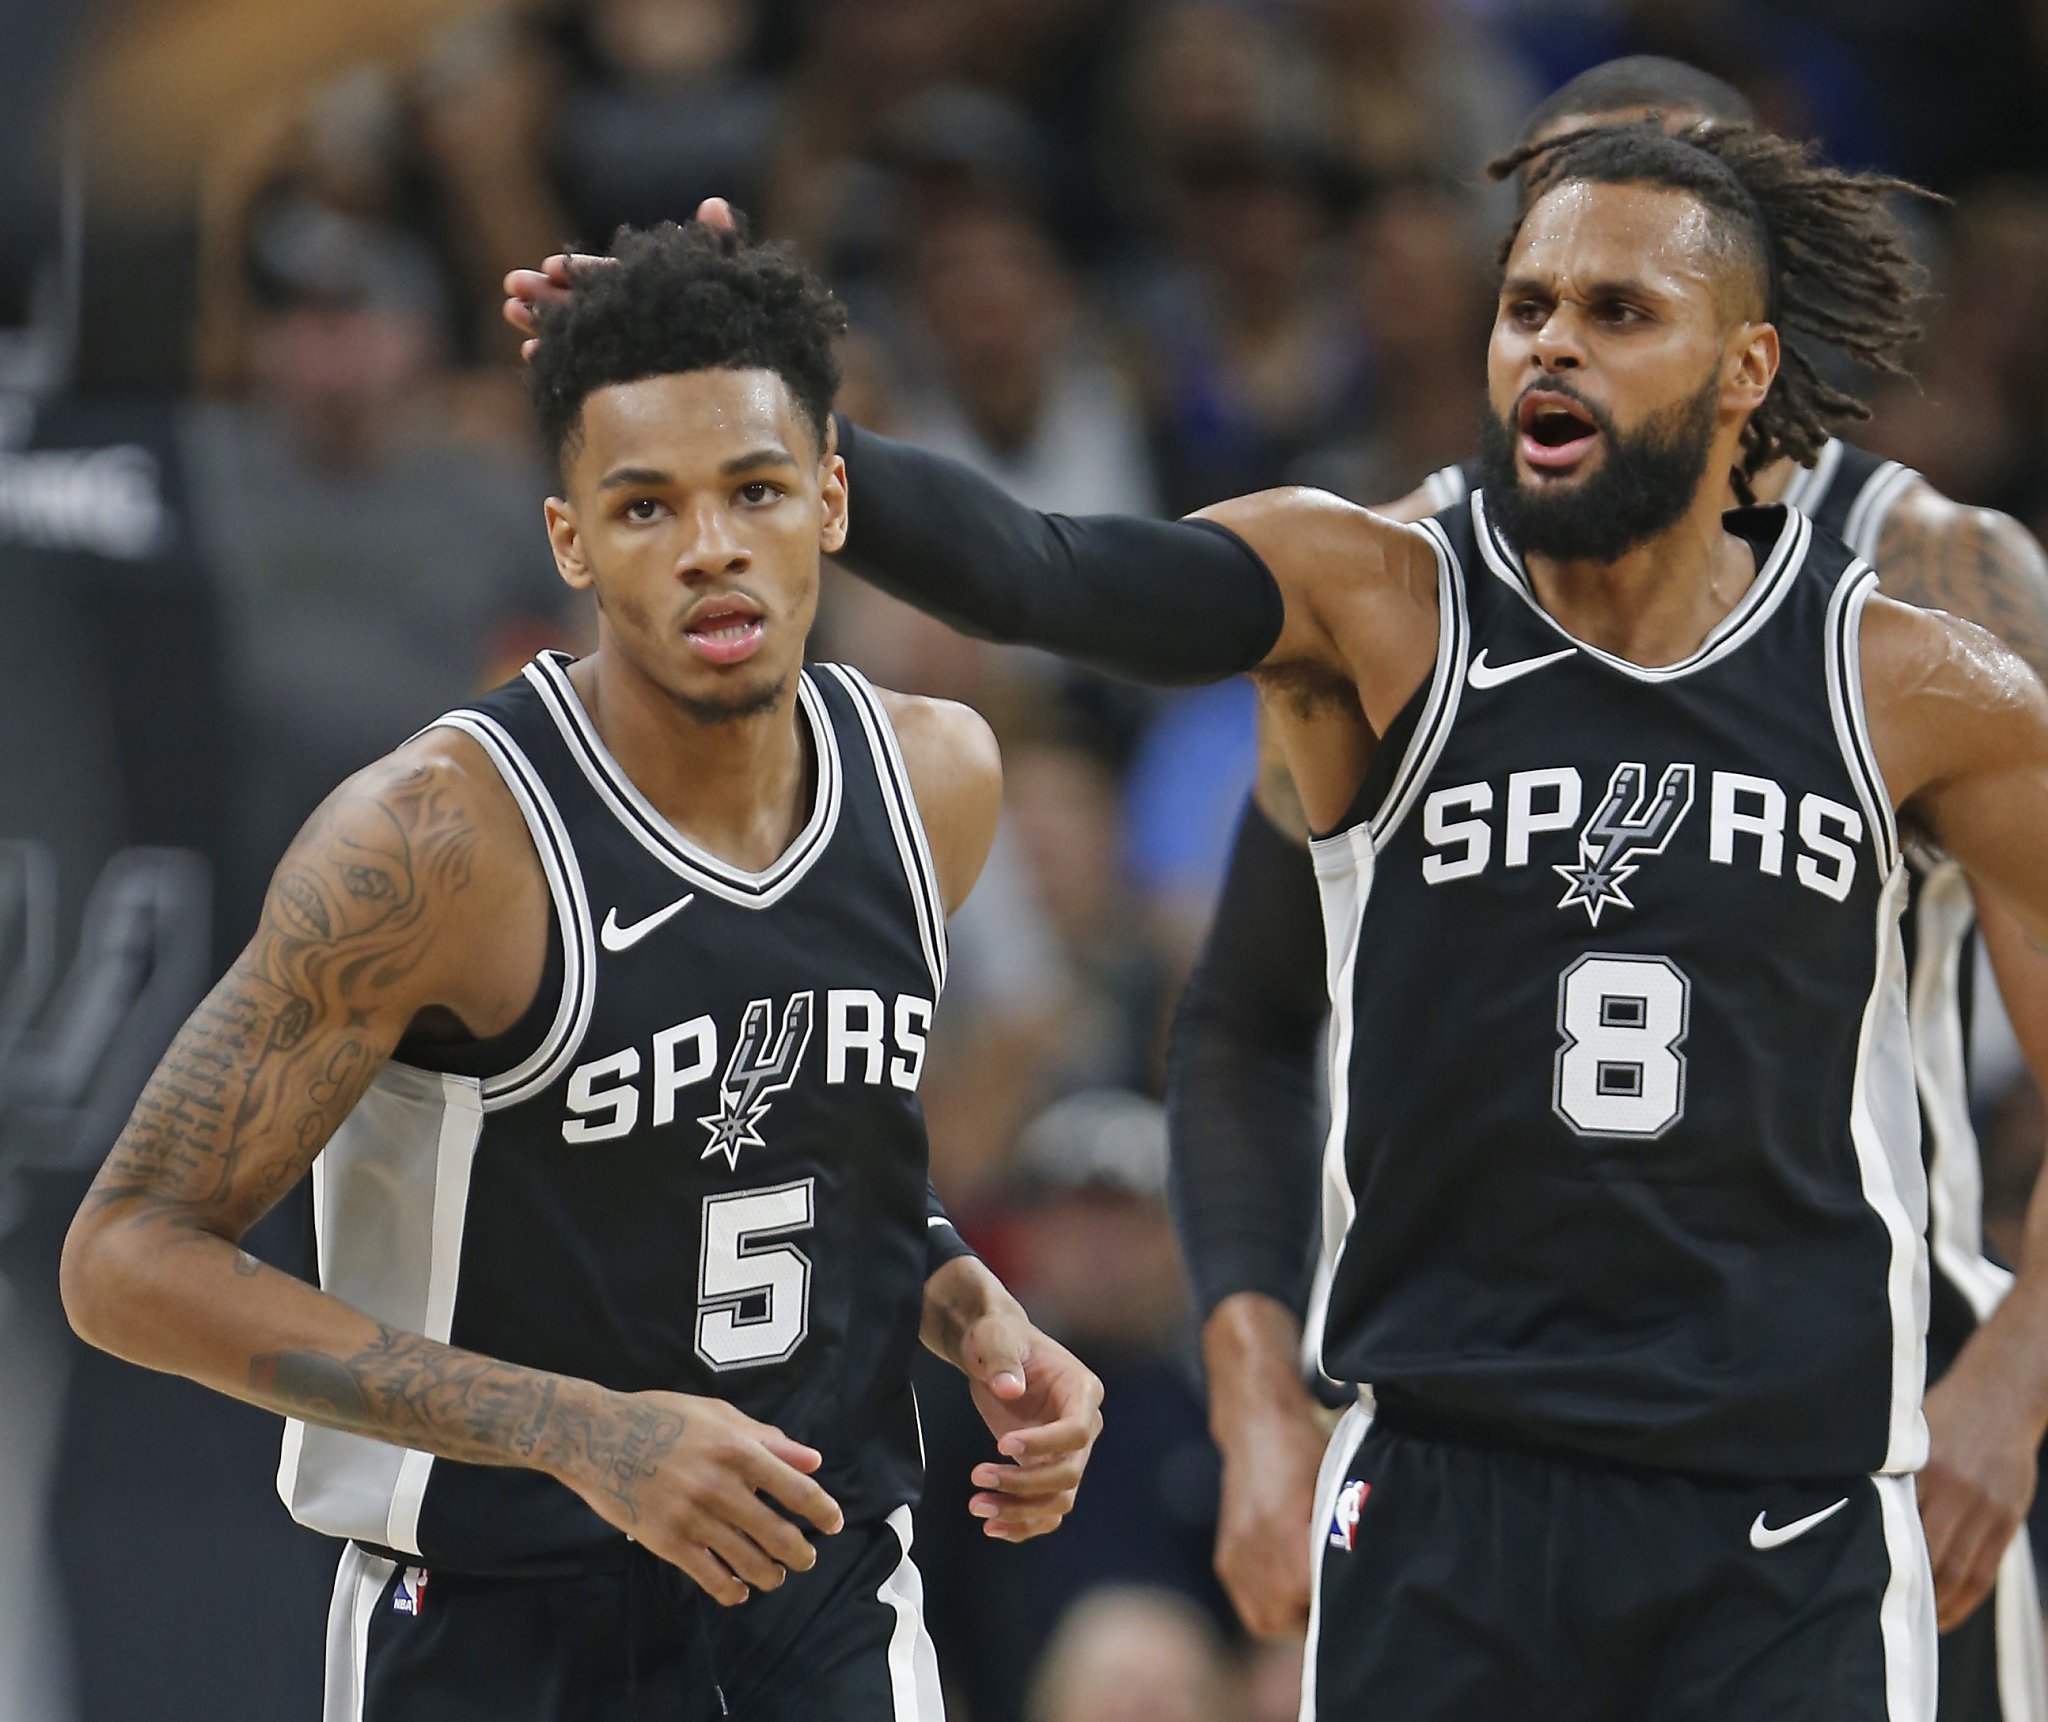 Dejounte Murray wants Spurs fans to show their appreciation for